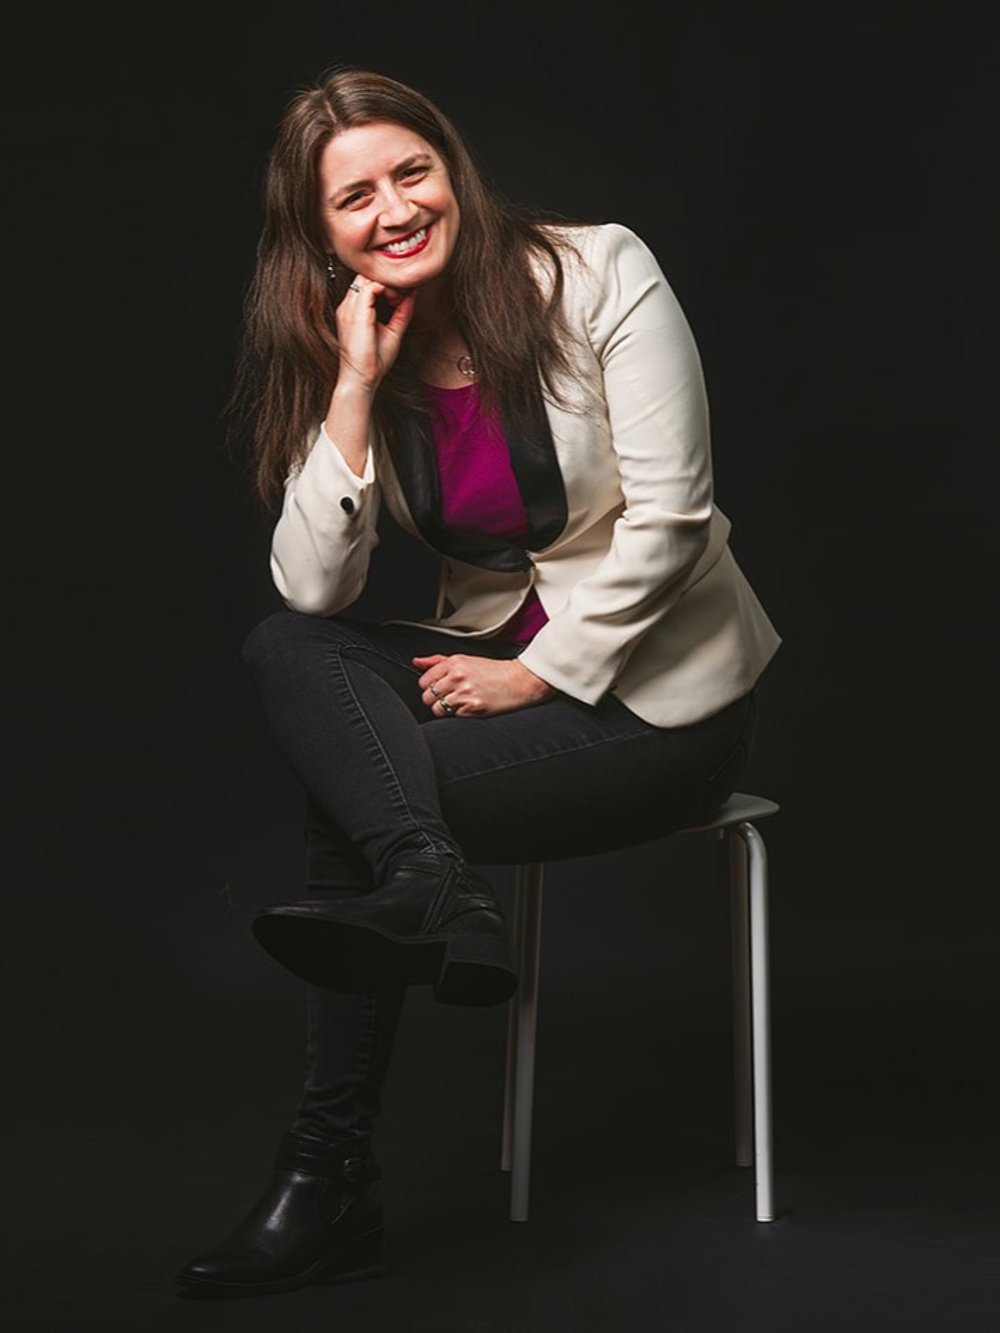 Lorena Aline sitting and smiling against a black background wearing a white and black blazer and magenta shirt.